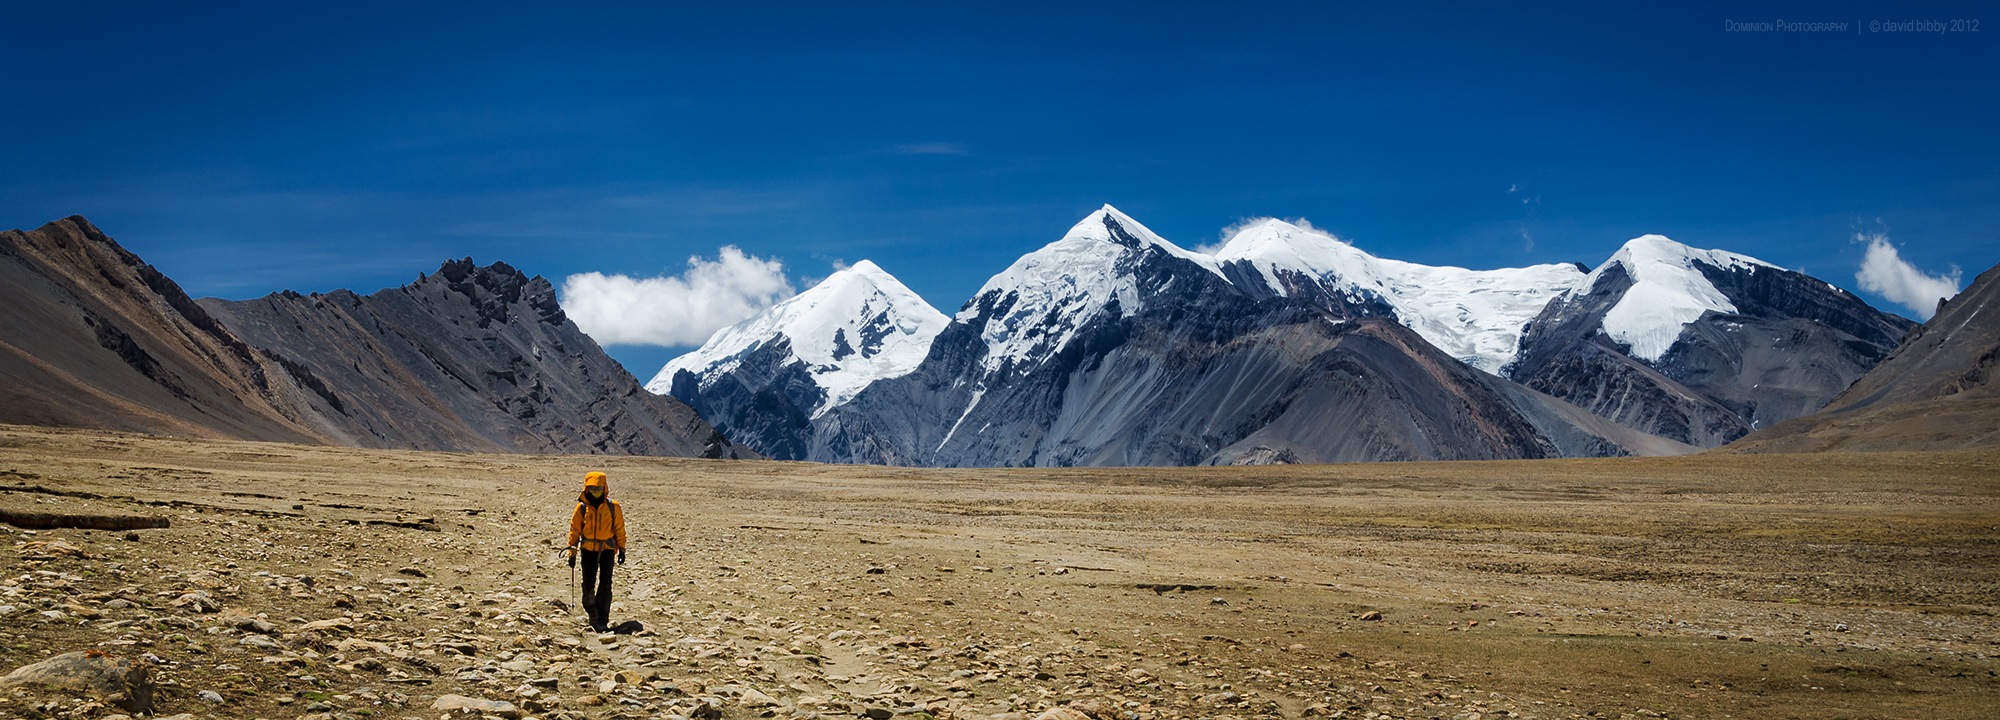   The long walk  - Crossing high plains after descending from Jungben La. Dolpa district. 